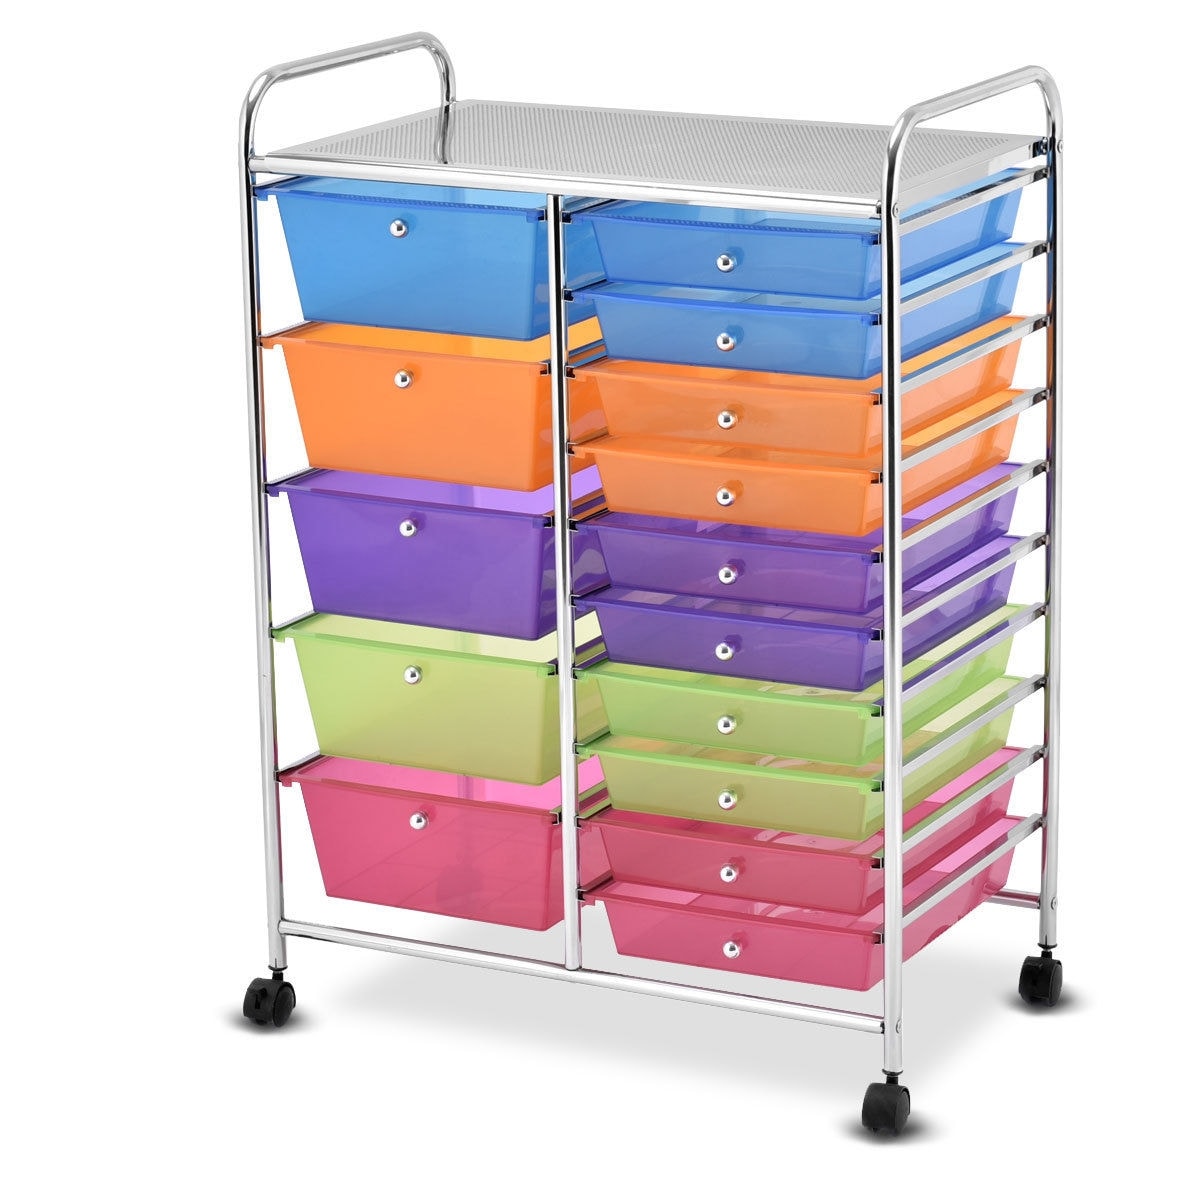 https://ak1.ostkcdn.com/images/products/is/images/direct/ebb5fc7558c9dc52d7a683bd9d6b8d88787d7696/Gymax-Rolling-Storage-Cart-15-Drawers-Organize-Shelf-Office-School.jpg